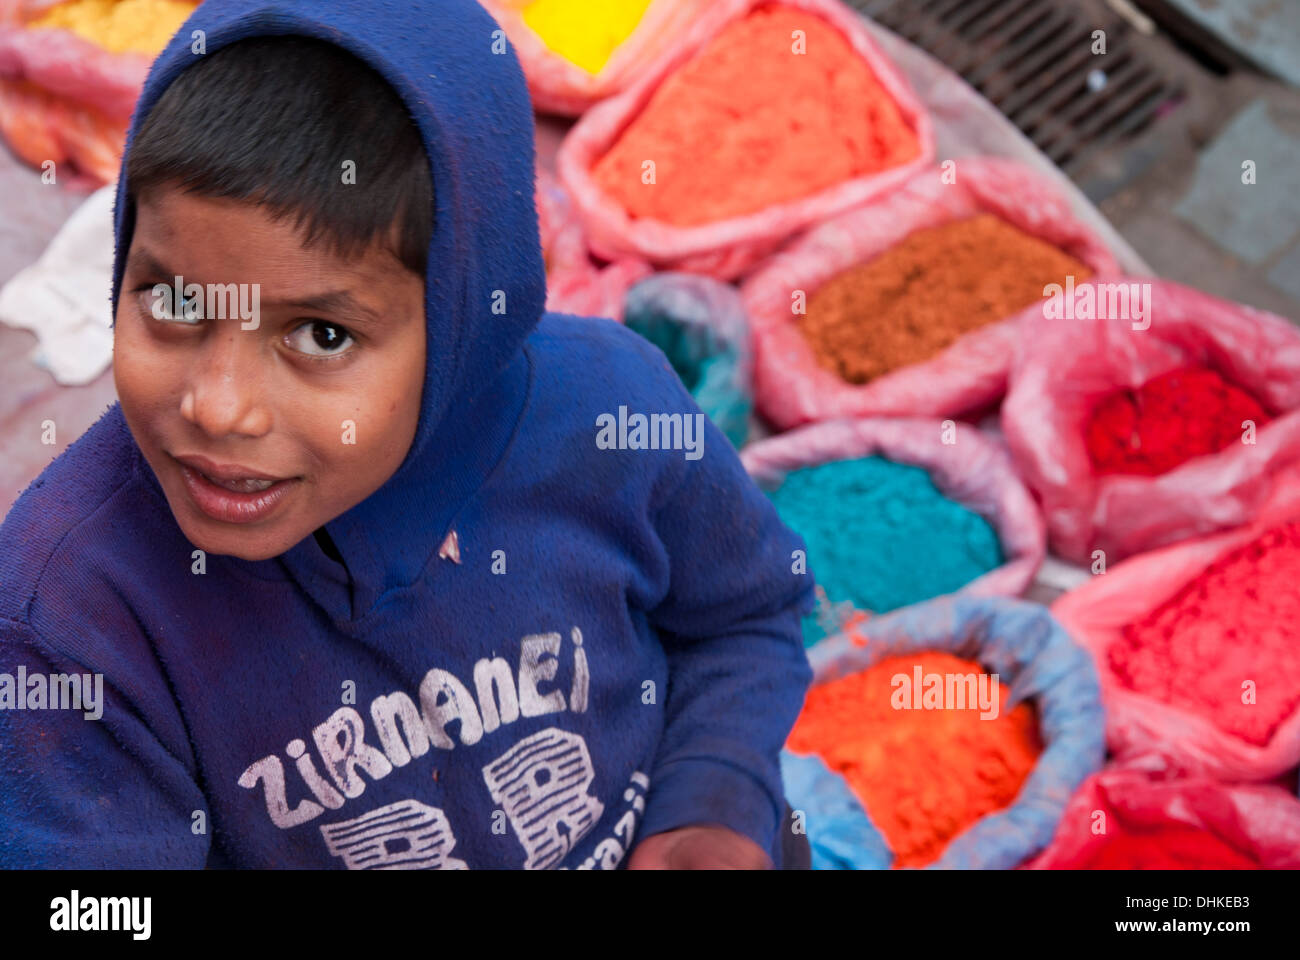 Young boy selling colors Stock Photo